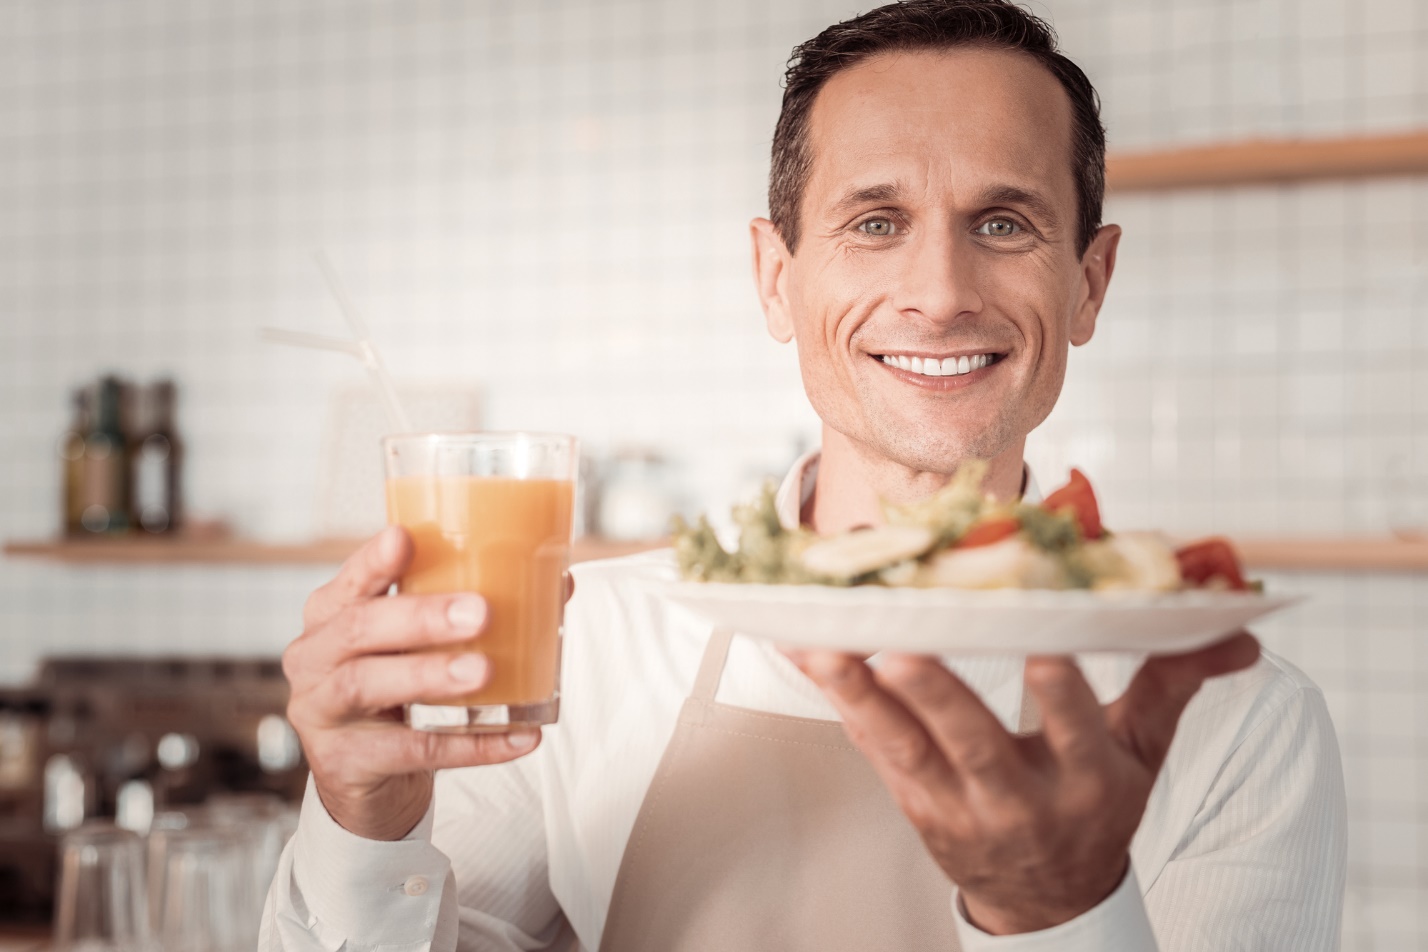 A person holding a plate of food and a glass of juice

Description automatically generated